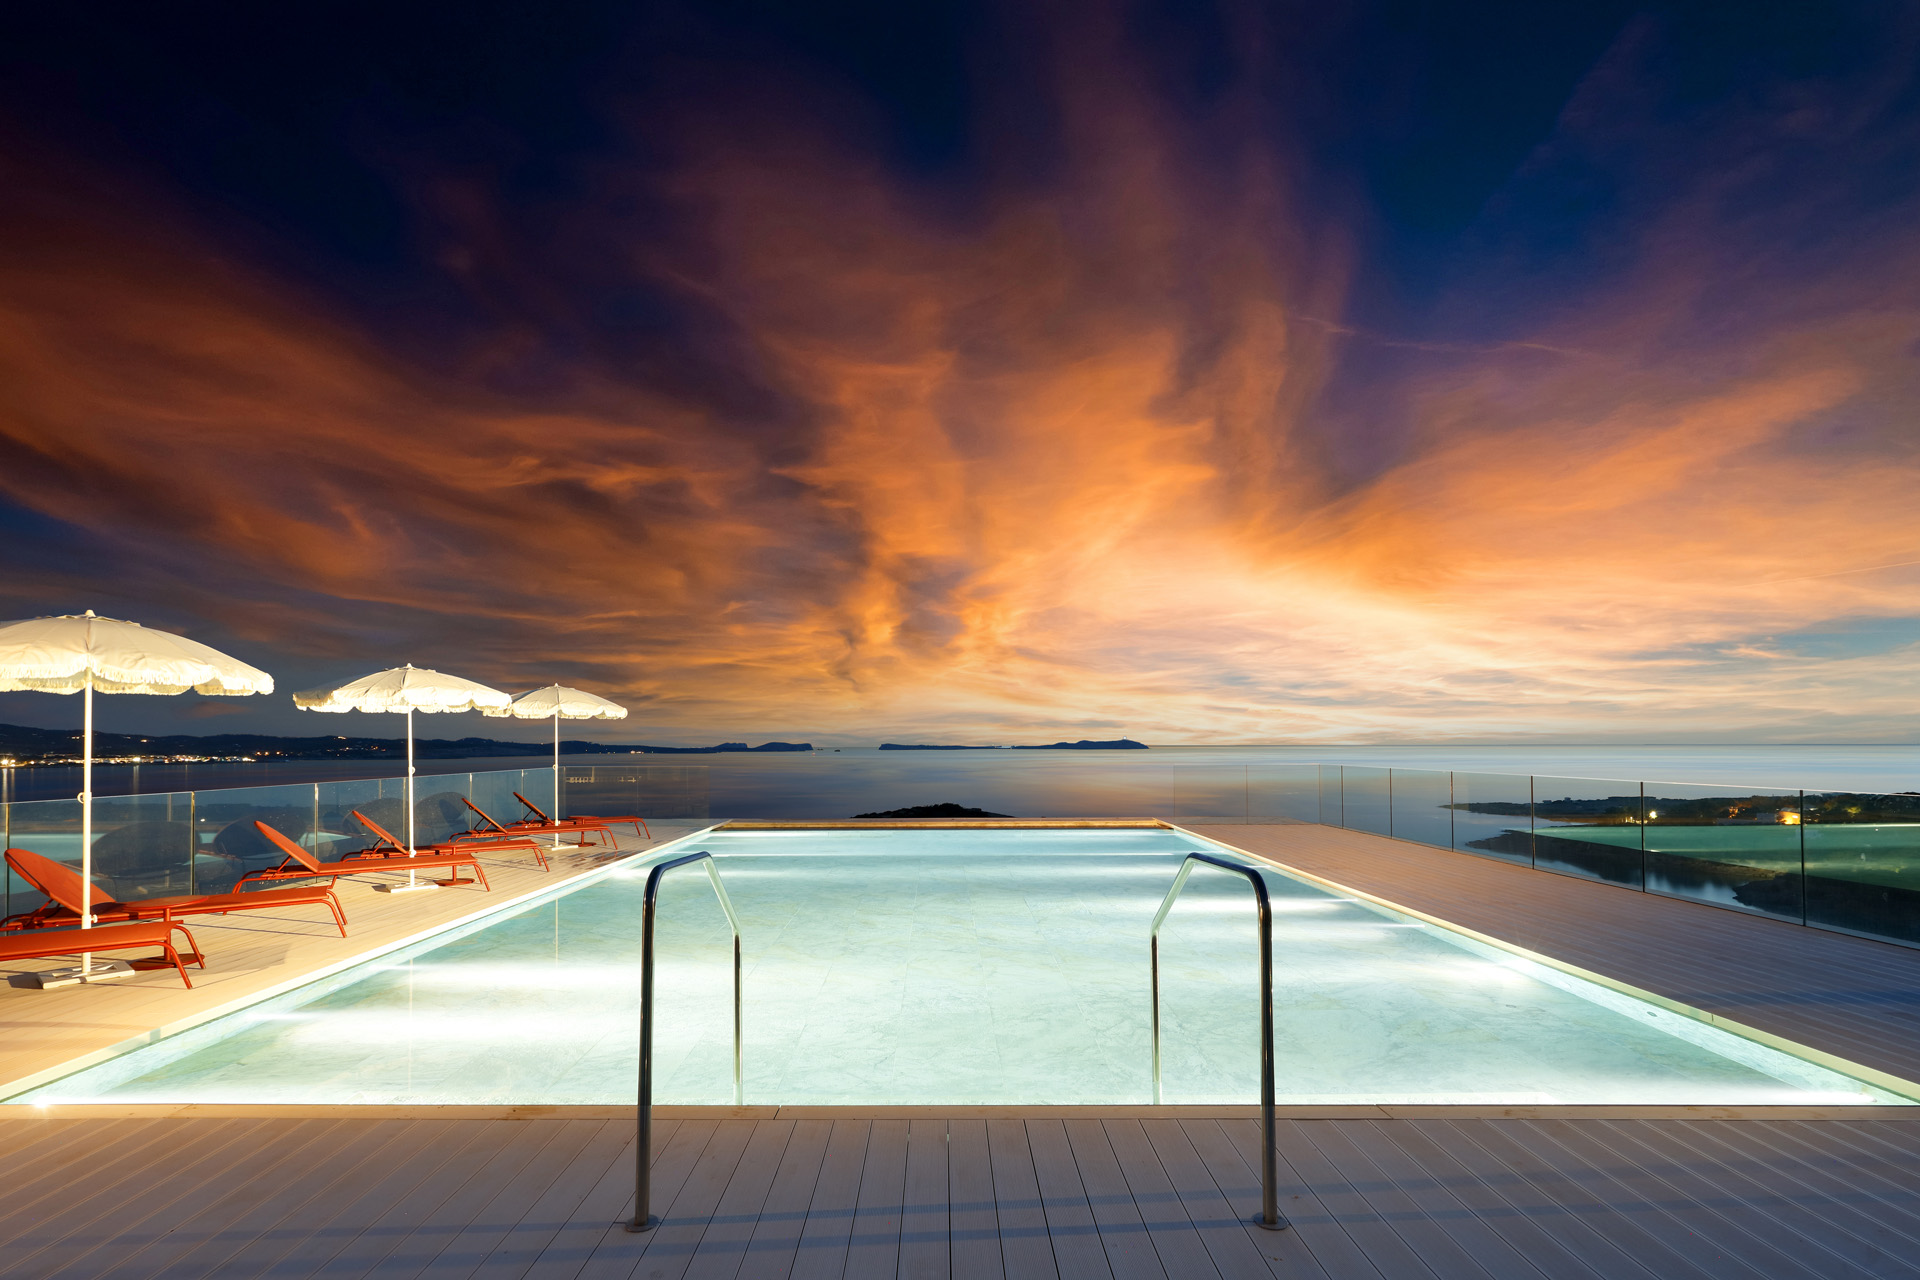 Sunset over the pool at TRS Ibiza Hotel